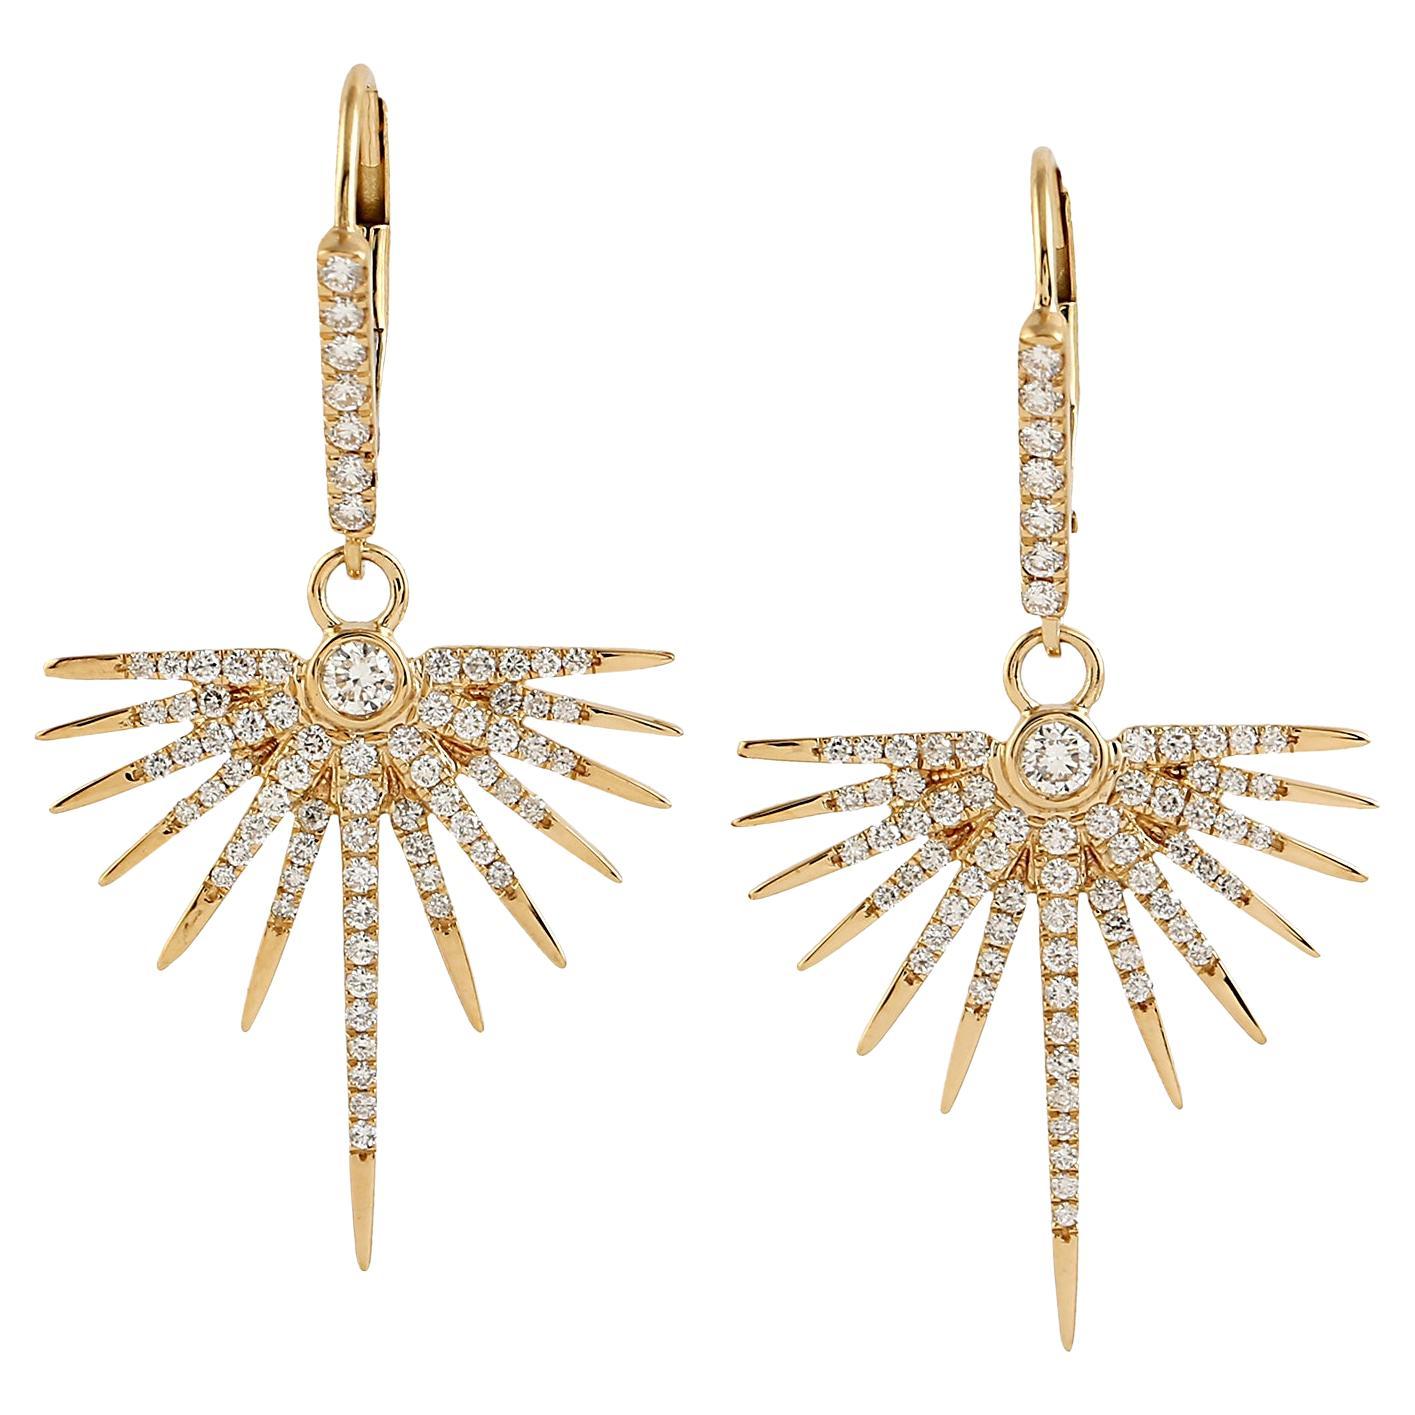 Sunburst Earrings With Diamonds Made In 18k Yellow Gold